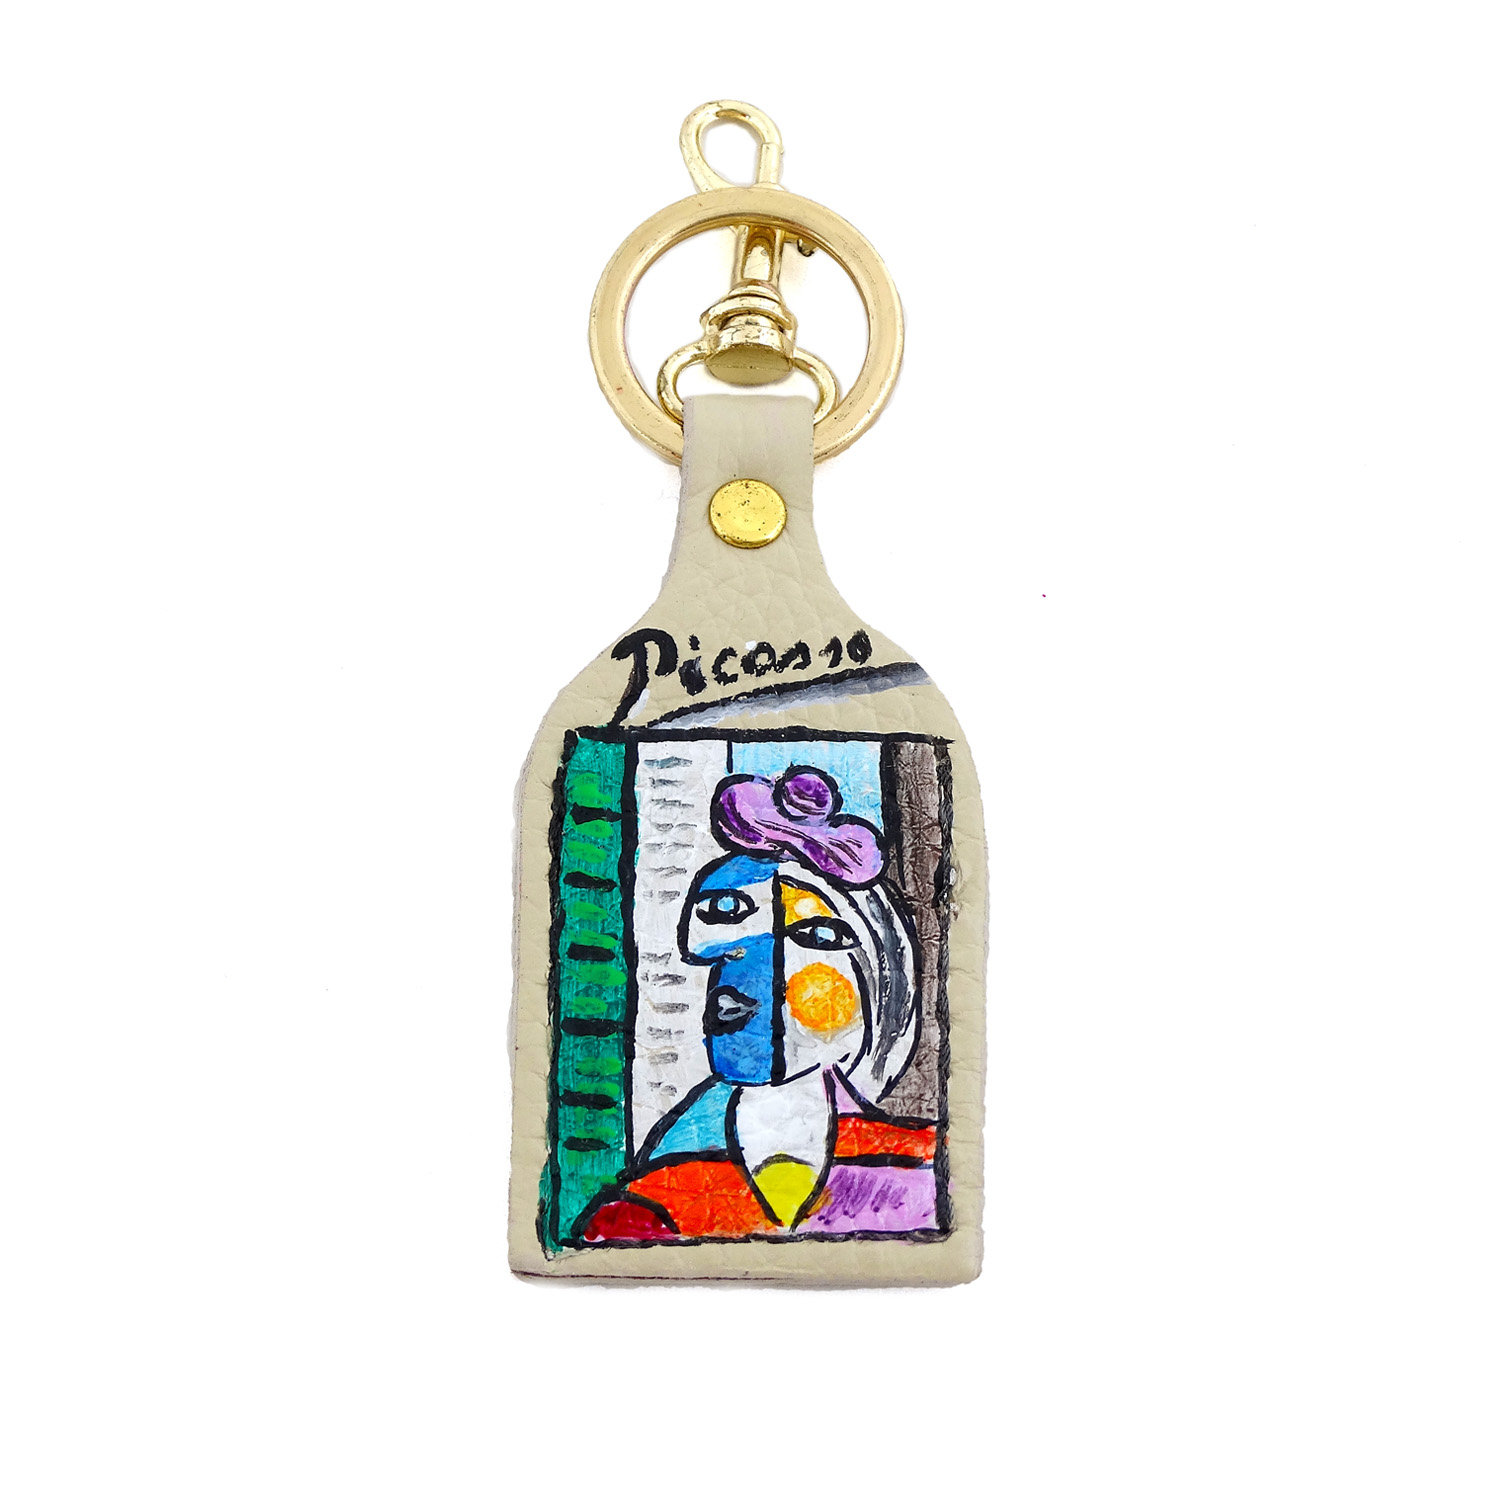 Hand painted keychain - Woman sitting in front of the window by Picasso